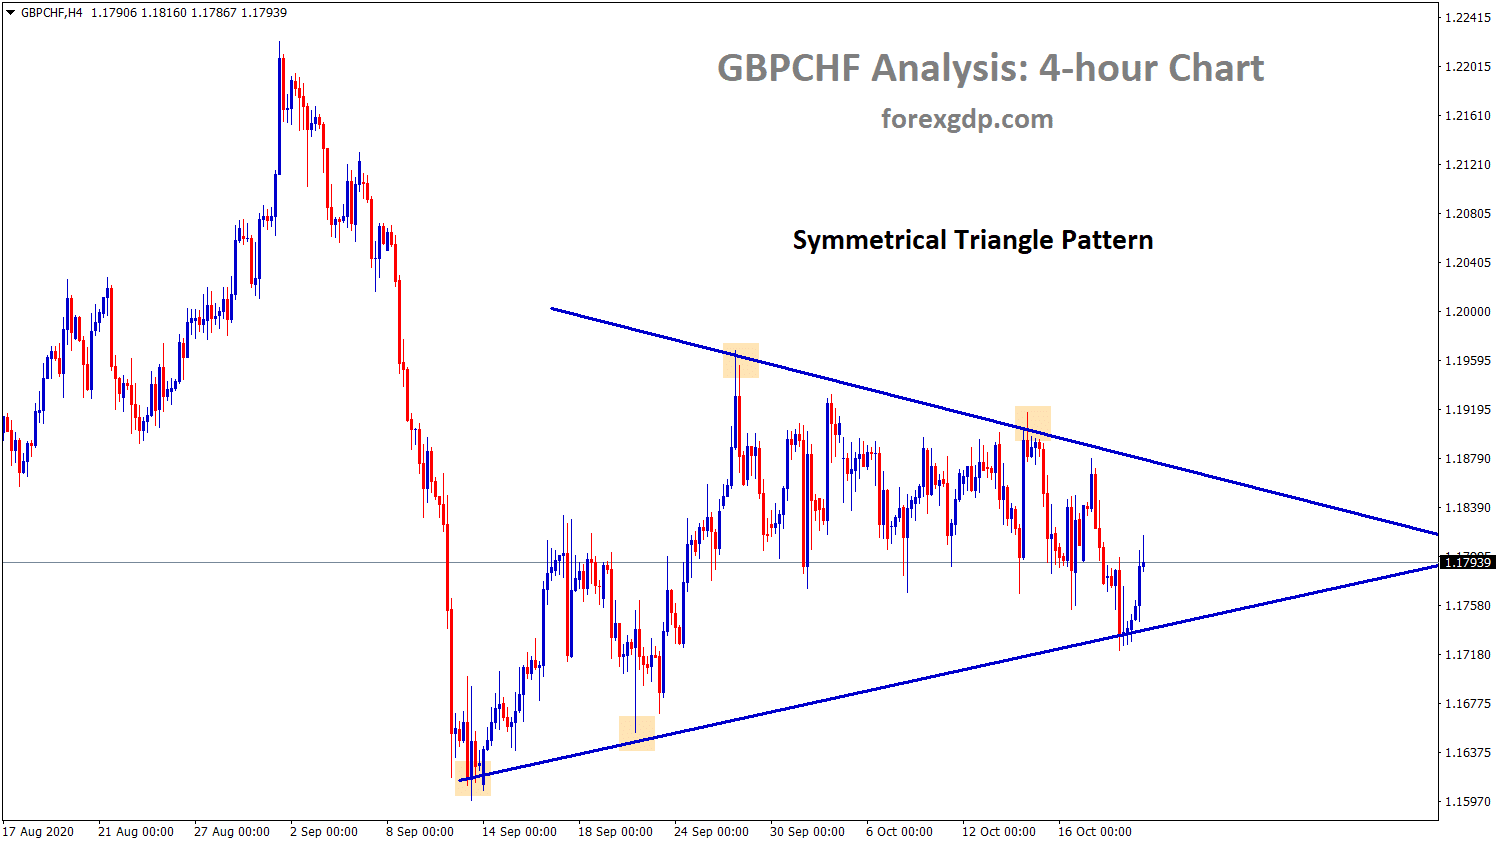 GBPCHF Symmetrical triangle pattern in h4